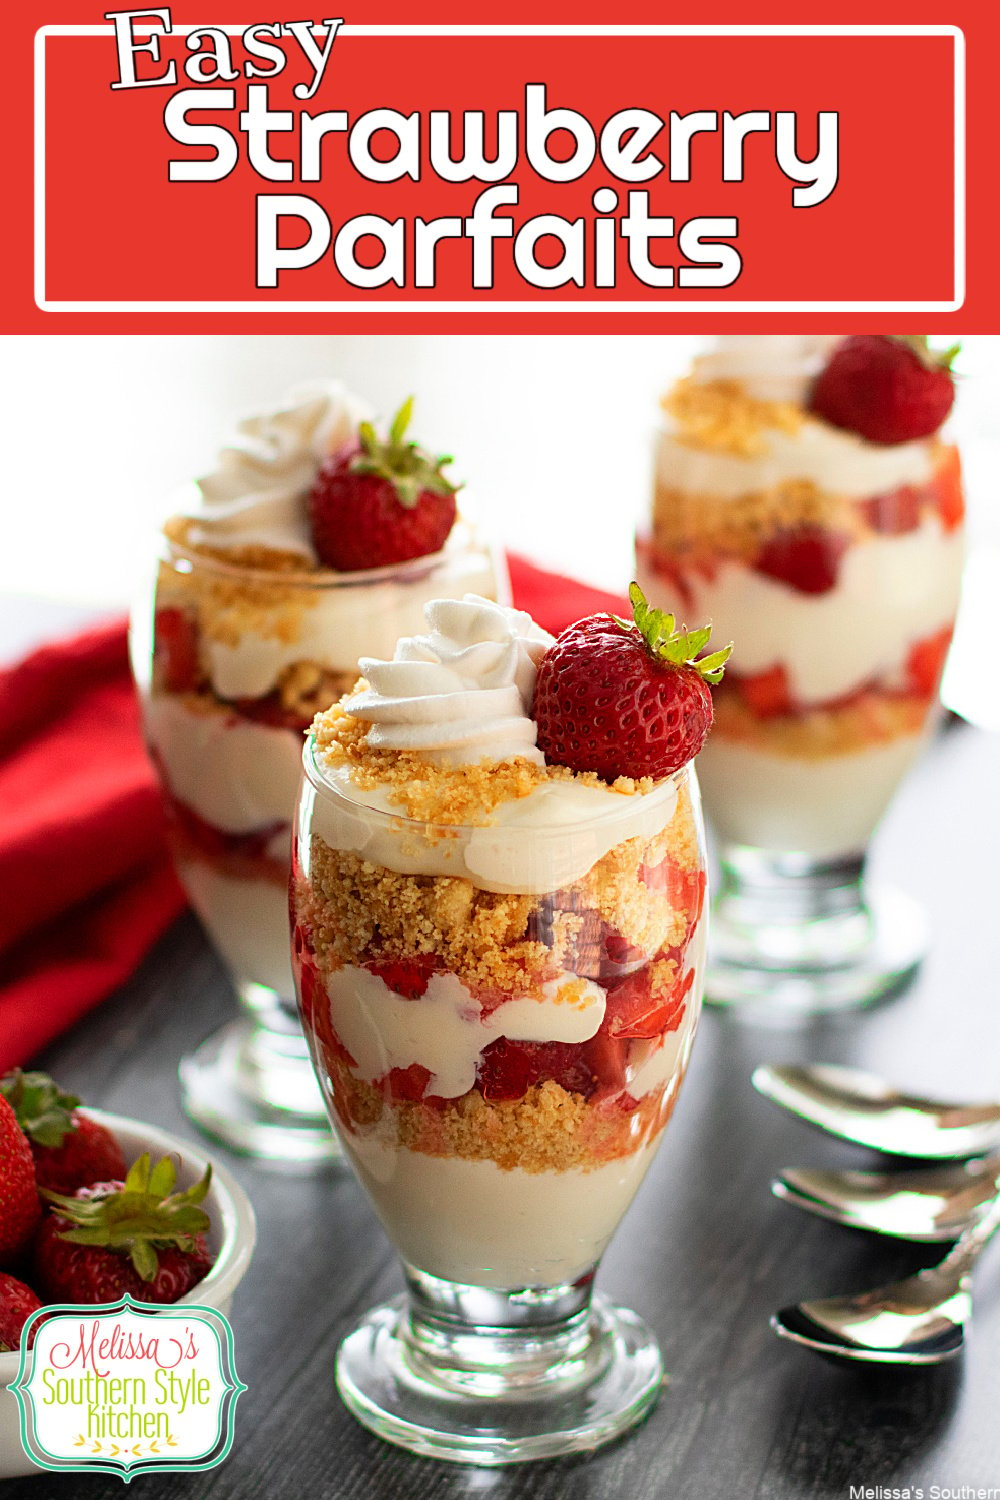 These pretty Easy Strawberry Parfaits feature layers of cheesecake, fresh macerated strawberries and buttered crumbs for texture #strawberries #strawberryparfaits #easystrawberryparfaits #parfaitrecipes #strawberrycheesecake #nobakedesserts